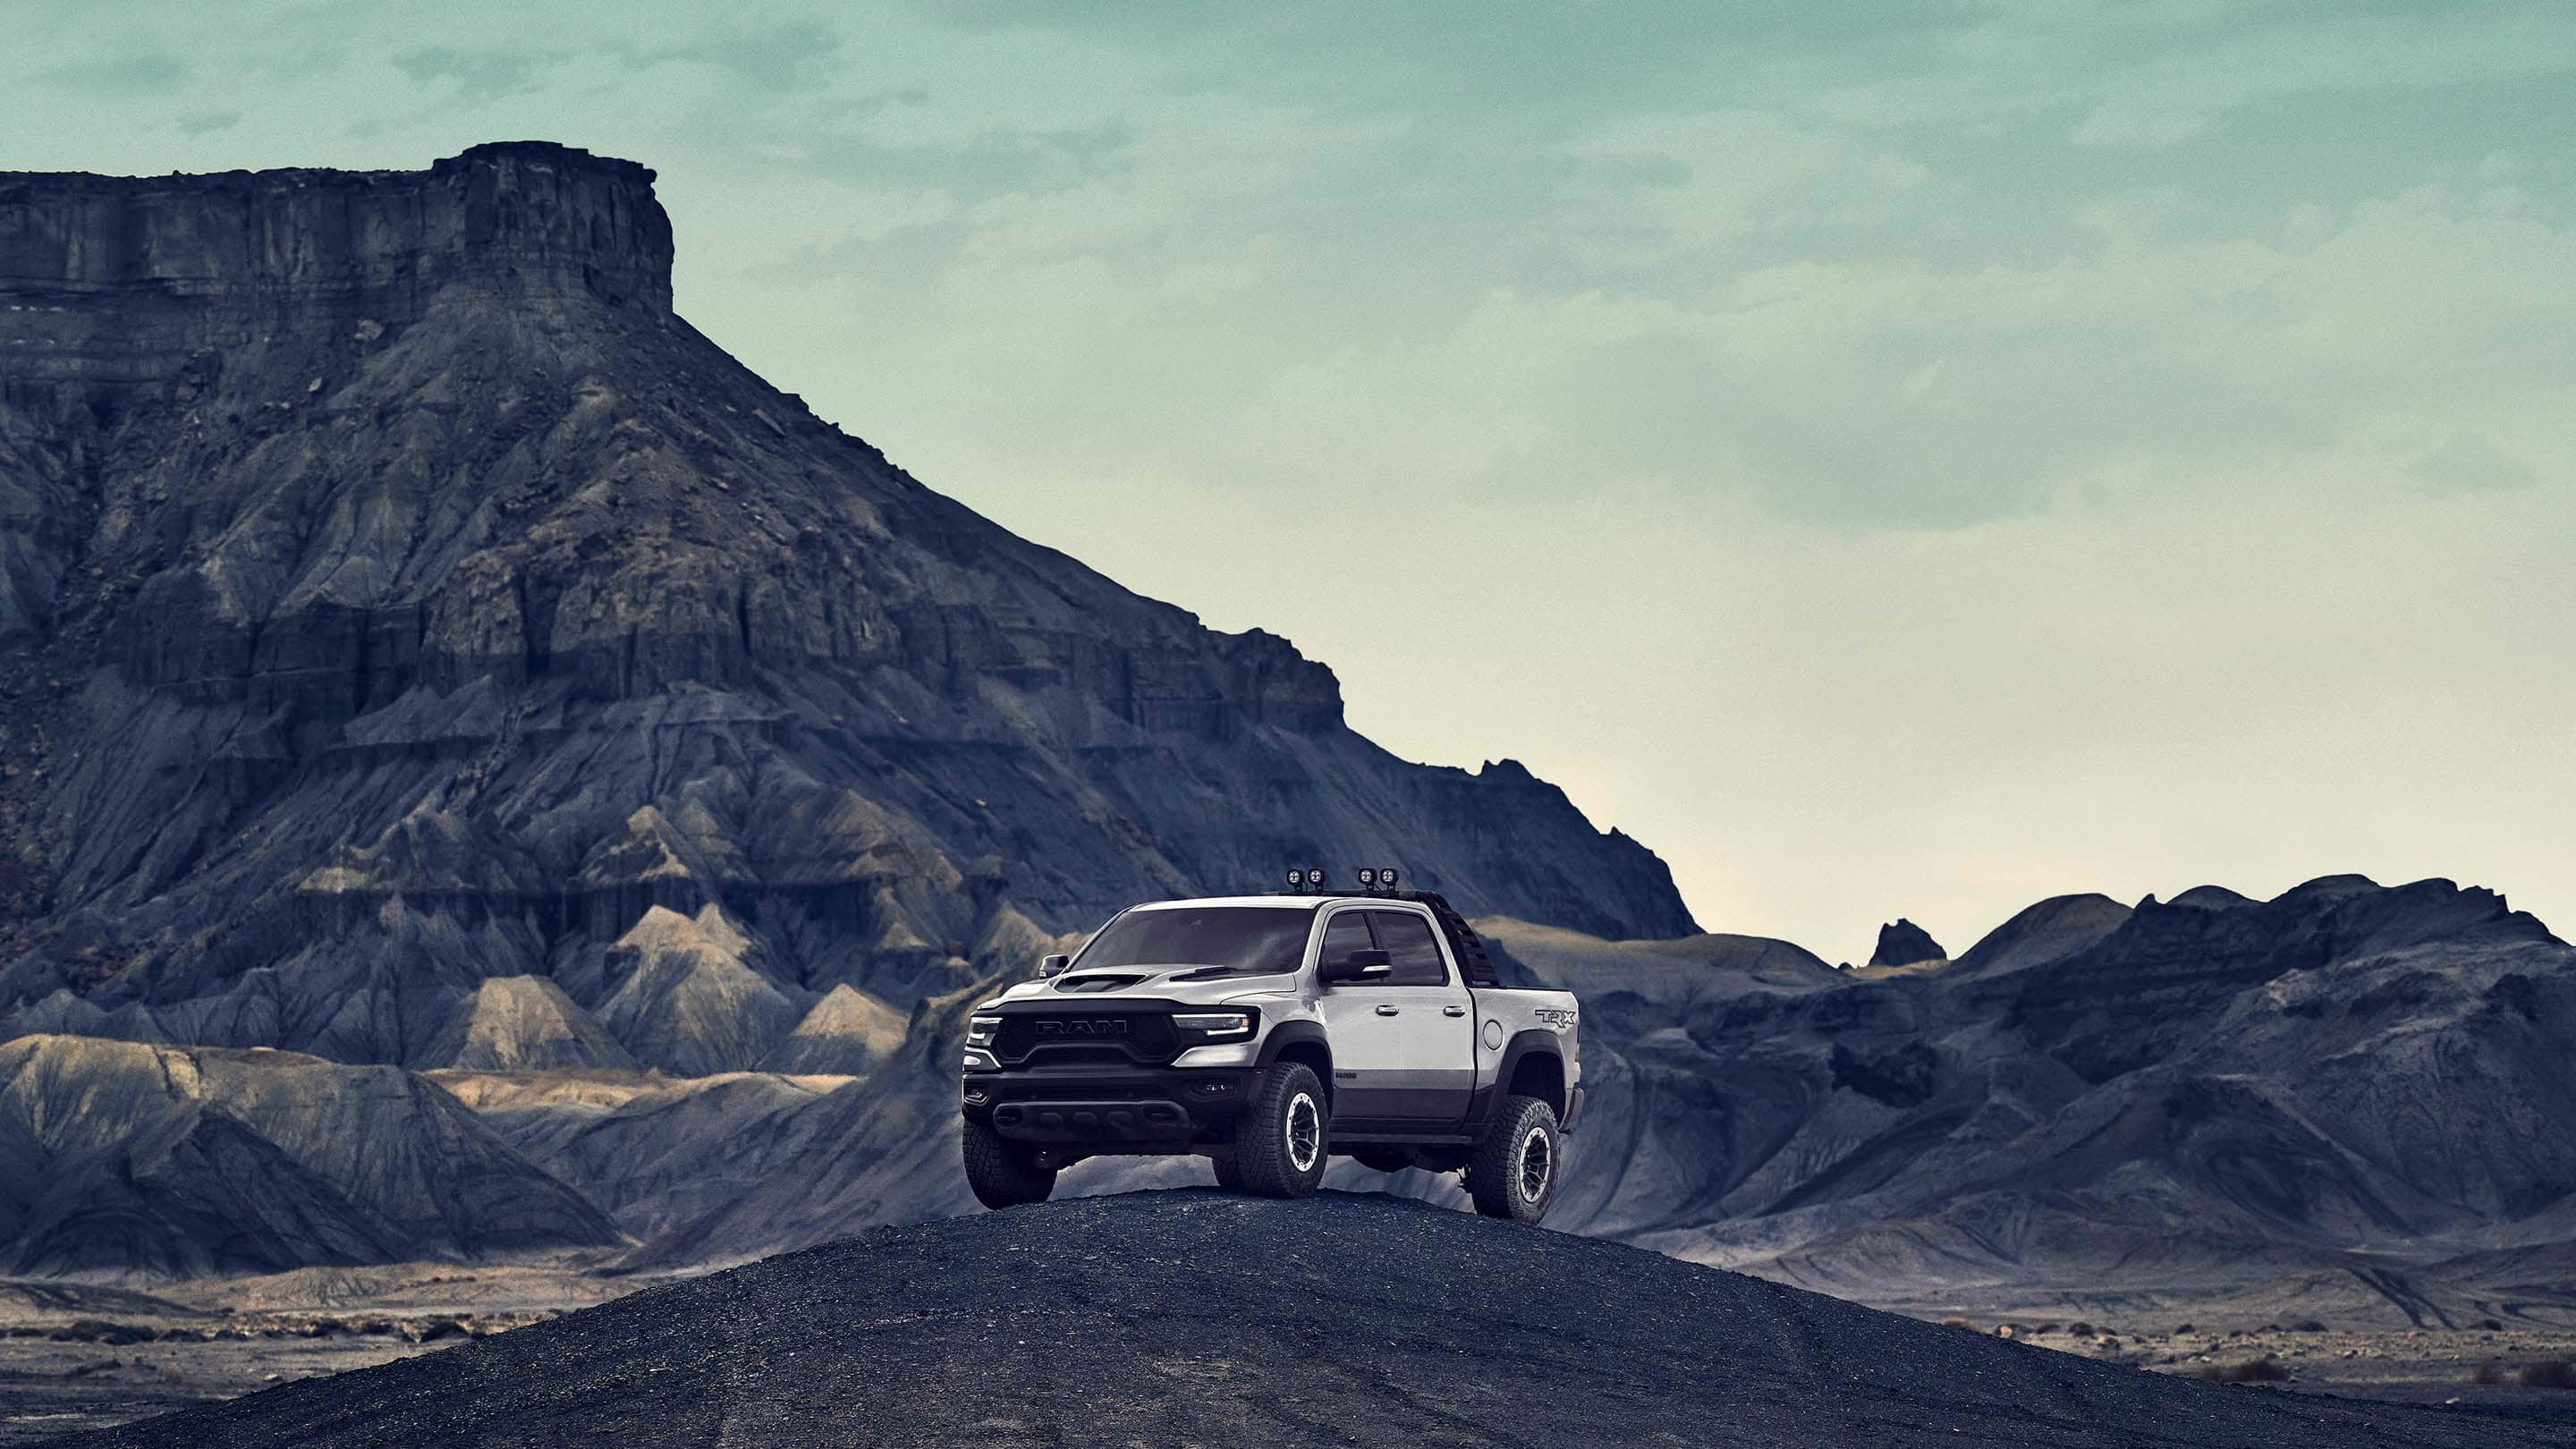 The 2021 Ram 1500 TRX parked against a mountain backdrop.